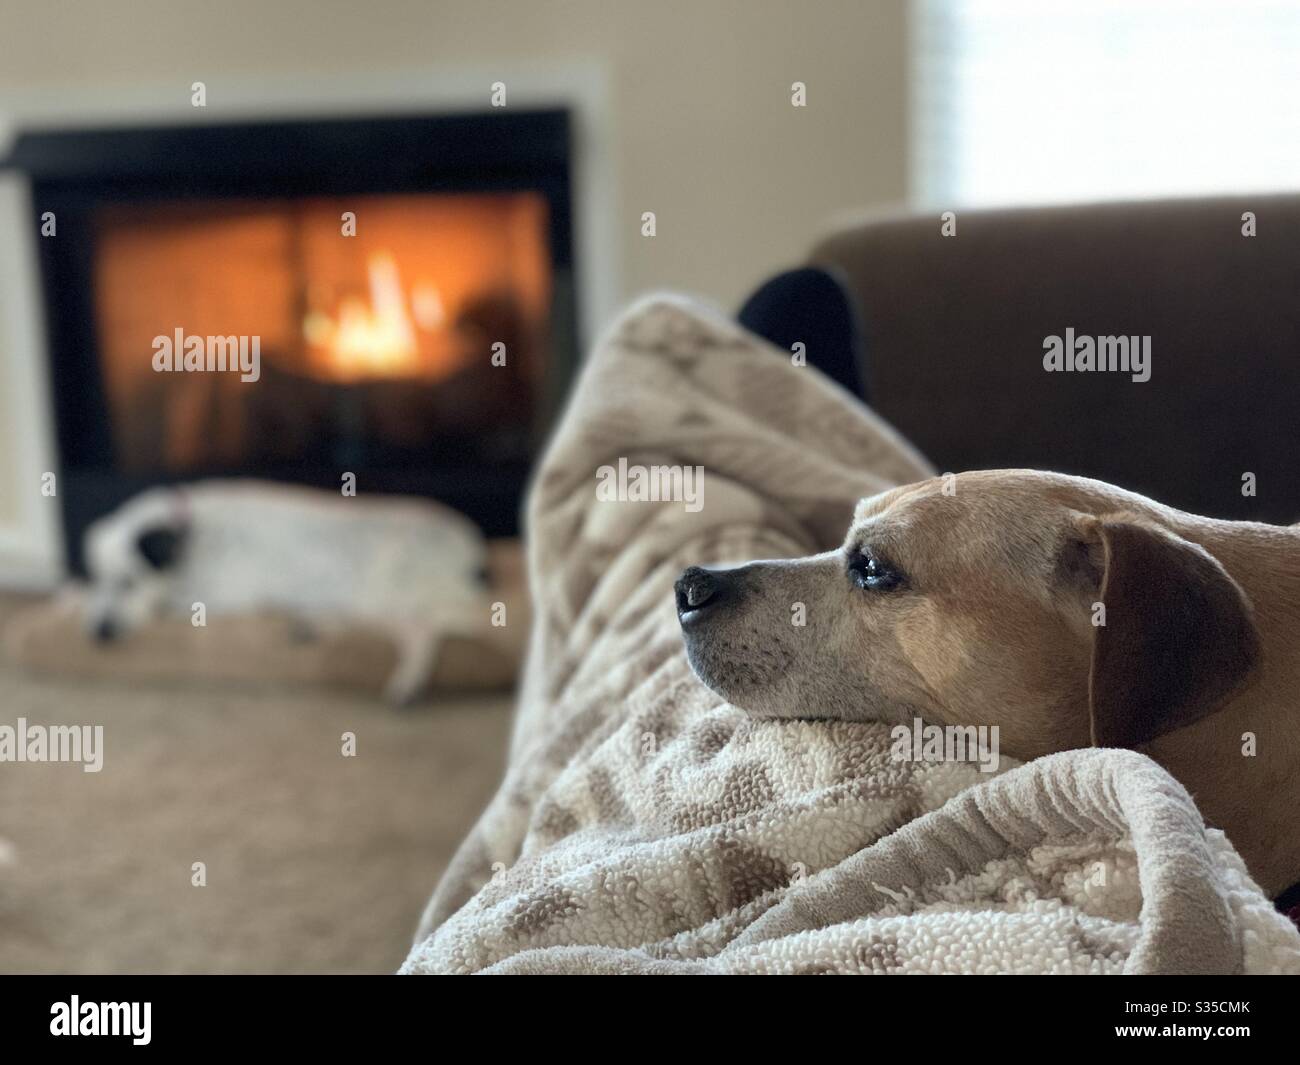 Dog sitting near fireplace while another sits nearby on a couch. Stock Photo